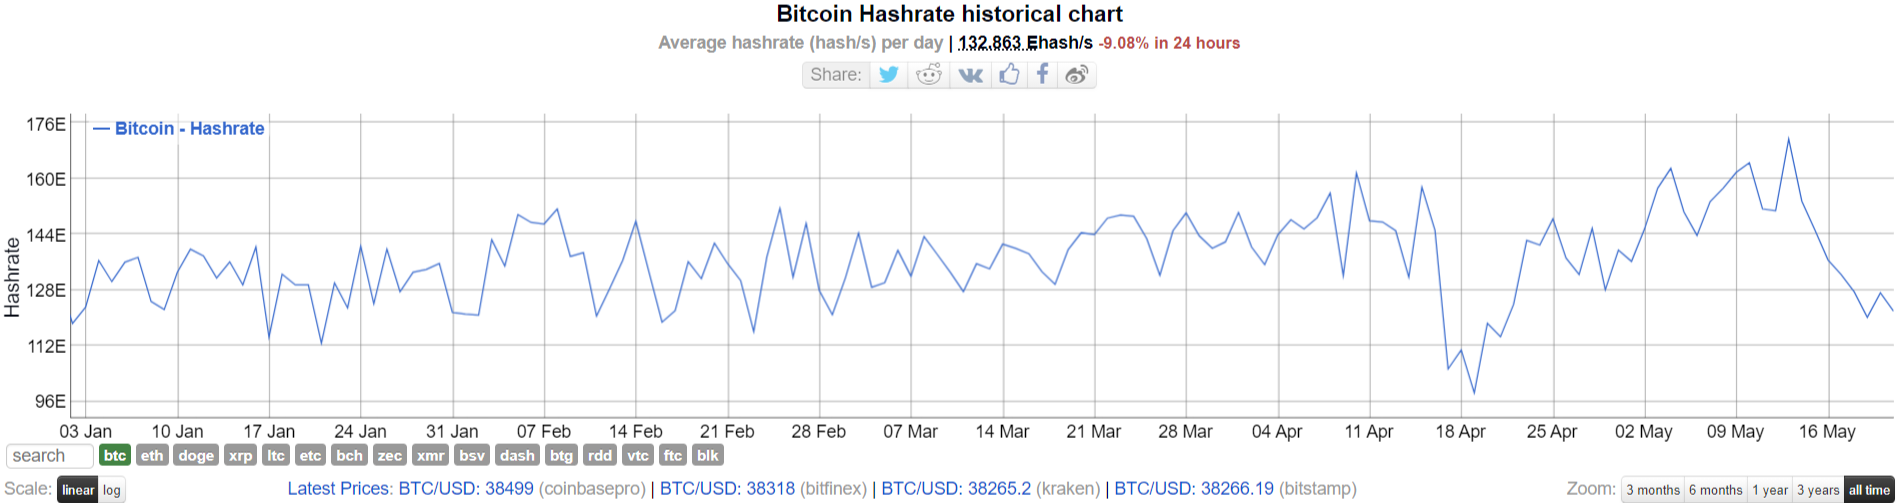 Bitcoin (BTC) network hashrate drops to 120 EH/s